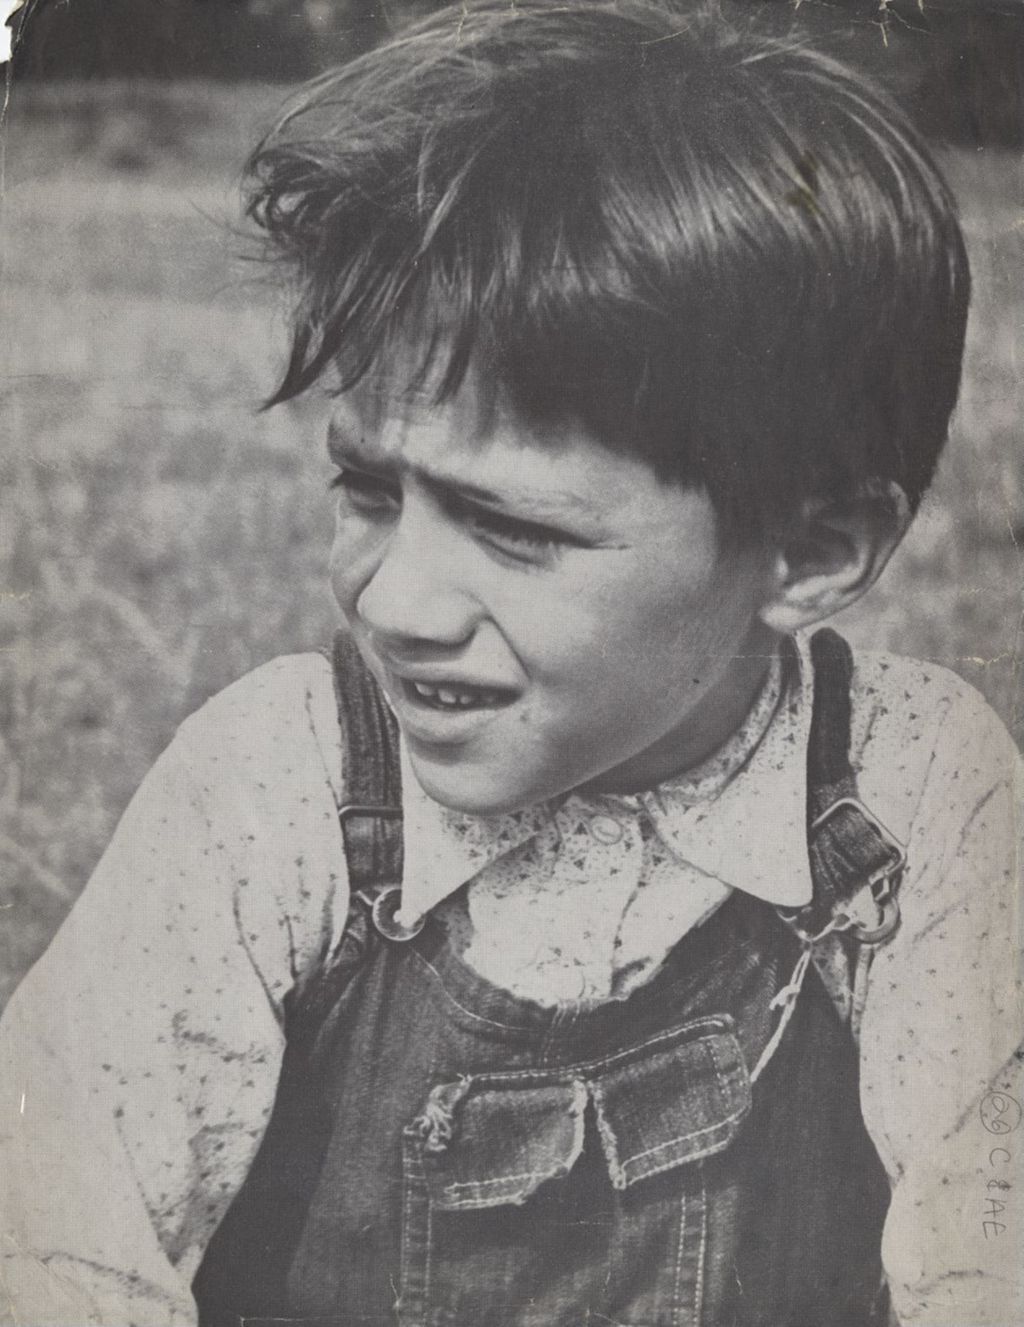 Miniature of Boy in overalls